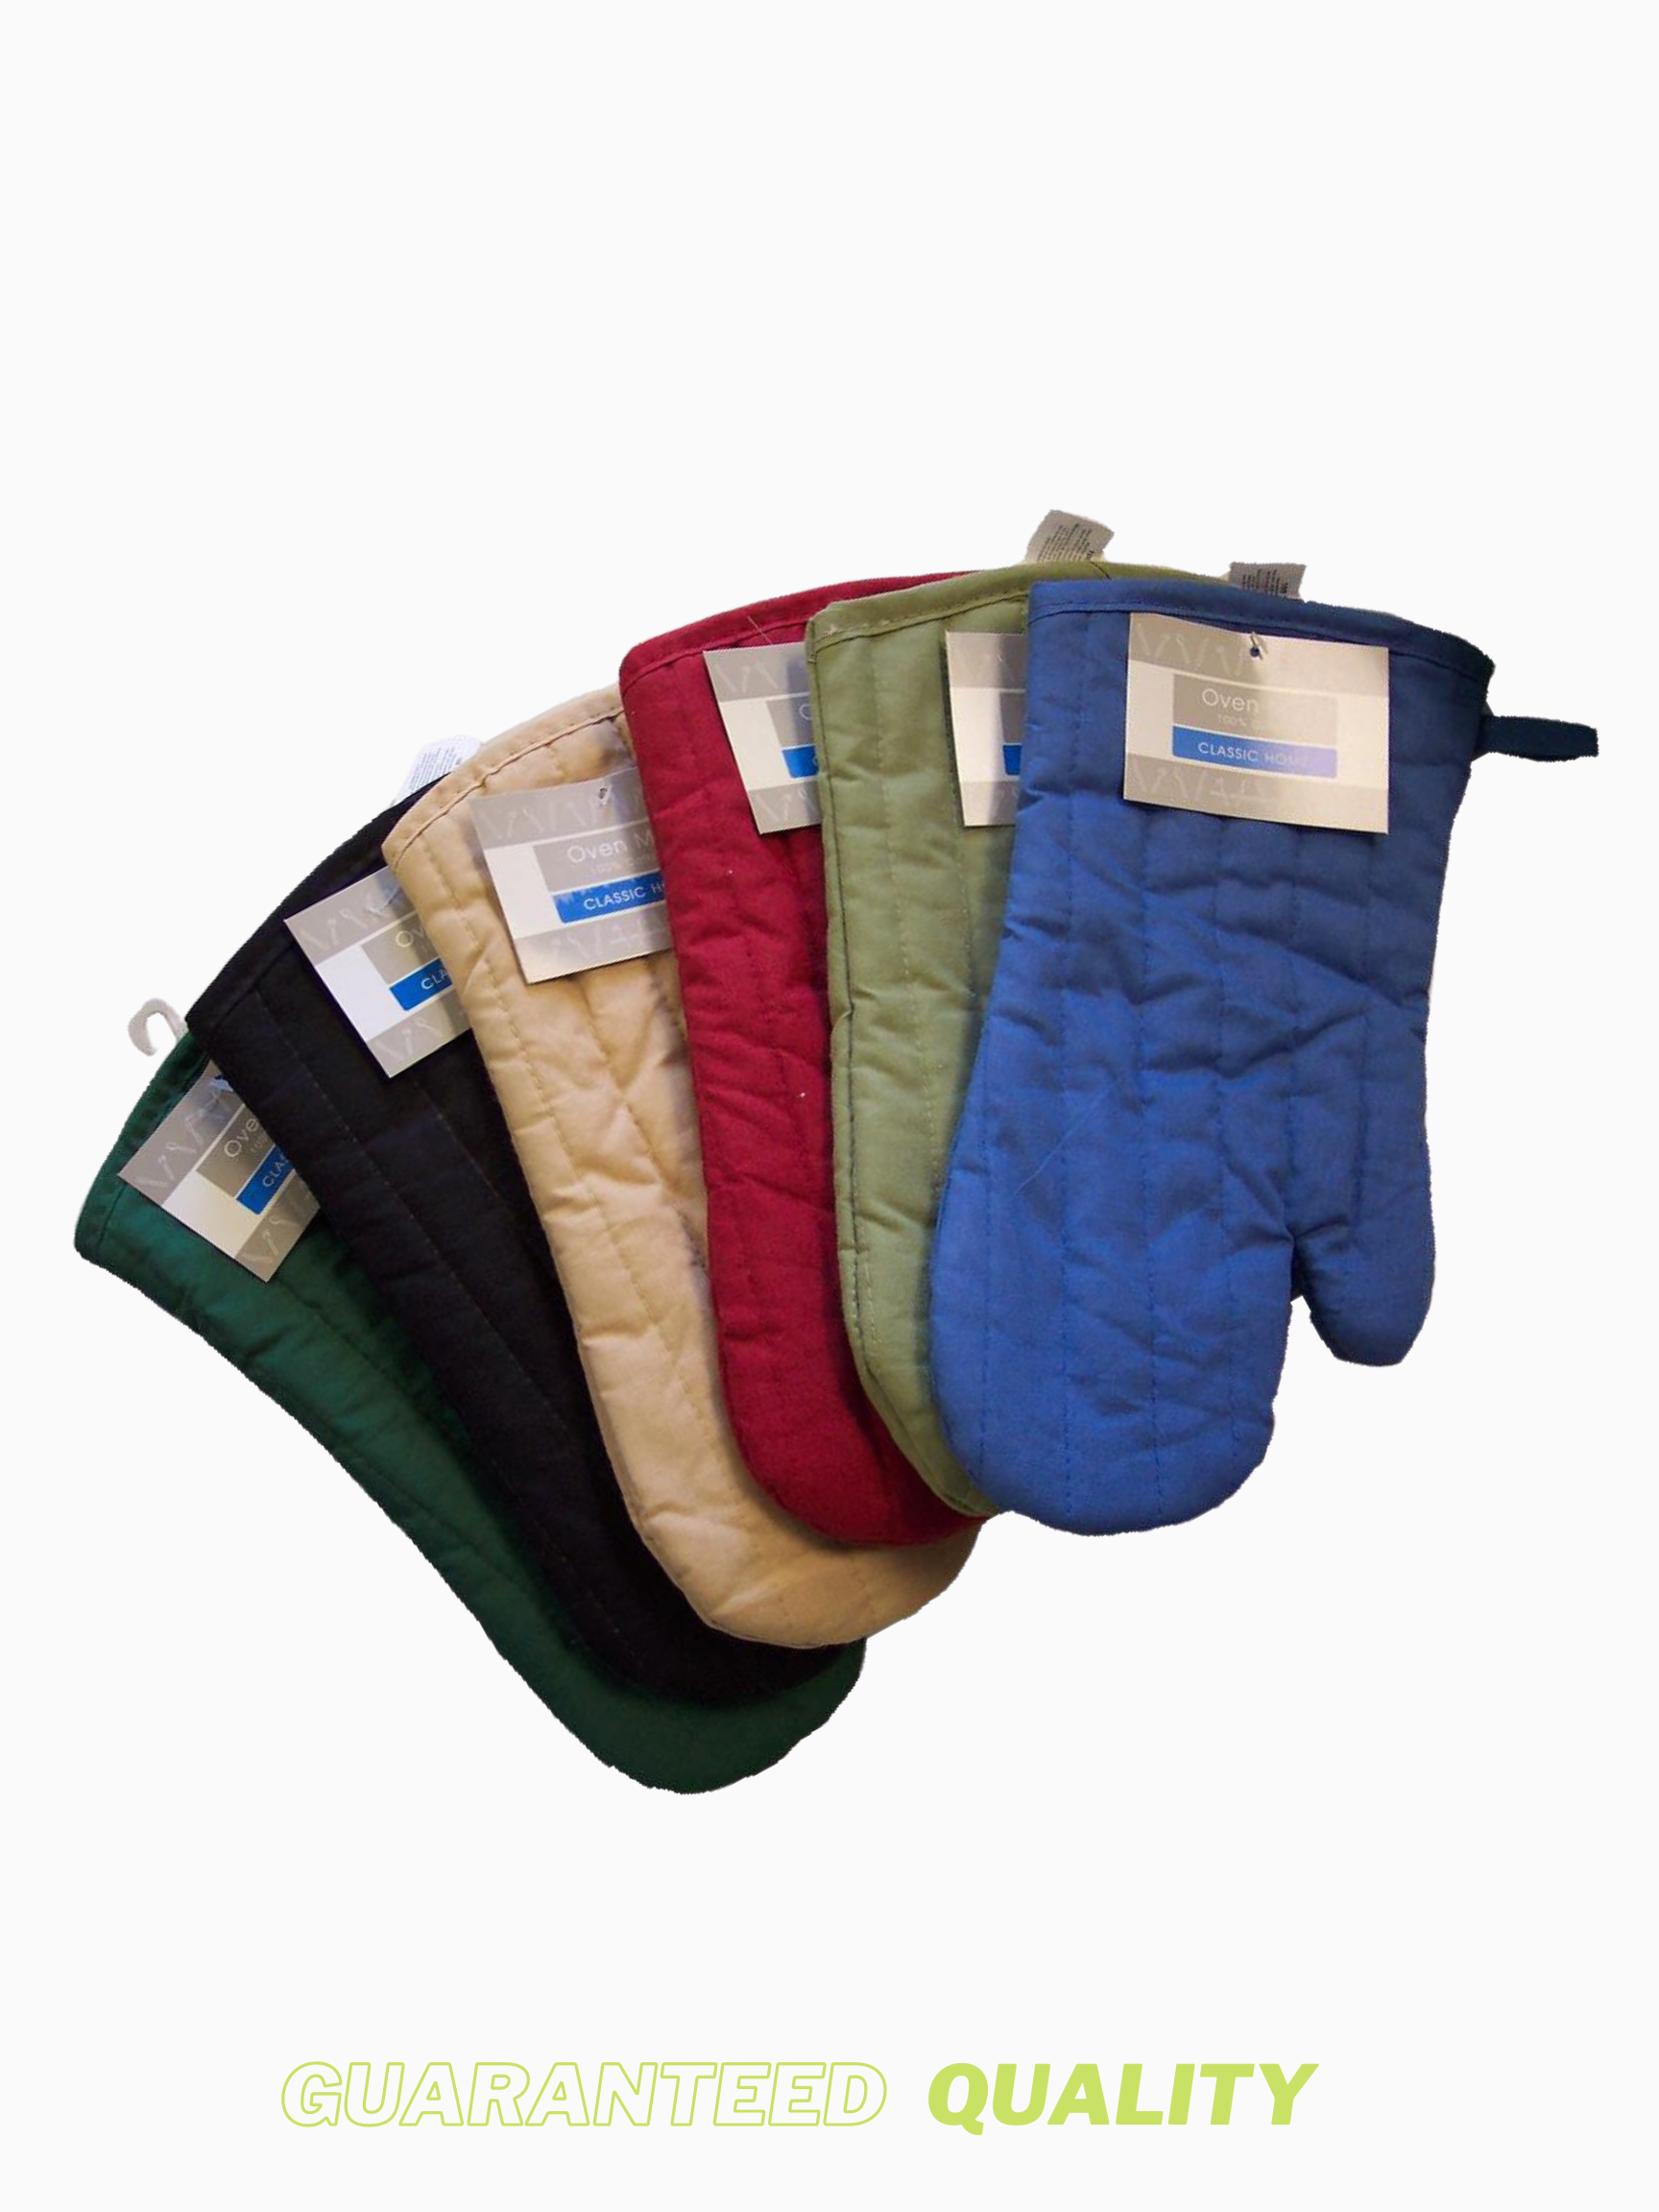 6 Pack Oven Gloves Heat Resistant 6 Color 100% Cotton By Cotton Hutt